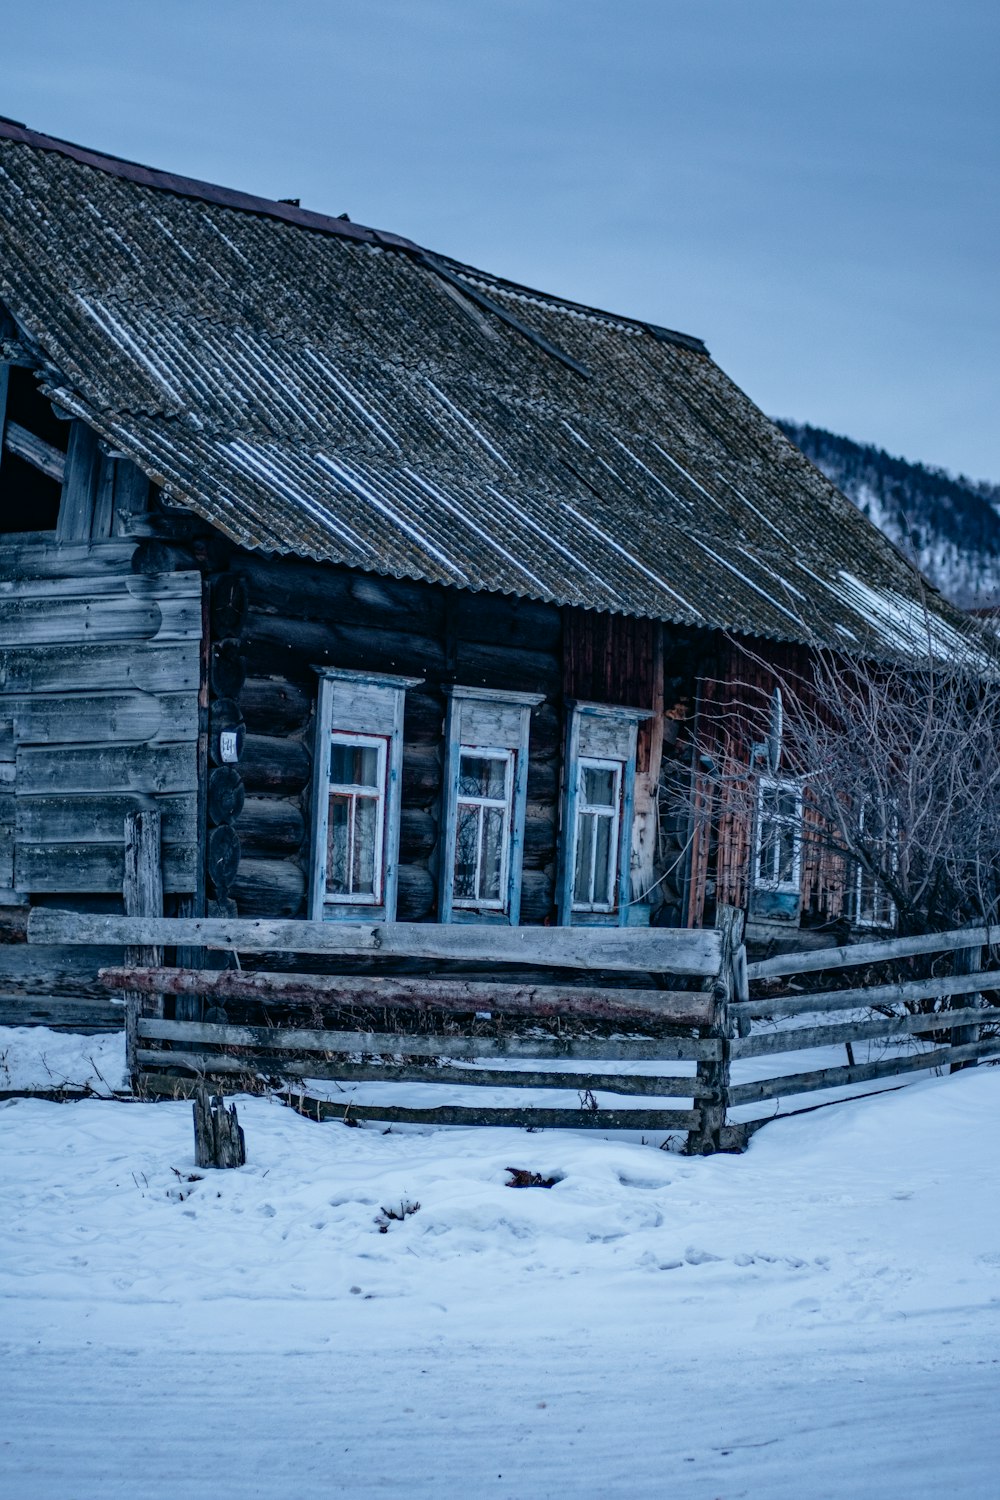 an old log cabin in the winter with snow on the ground